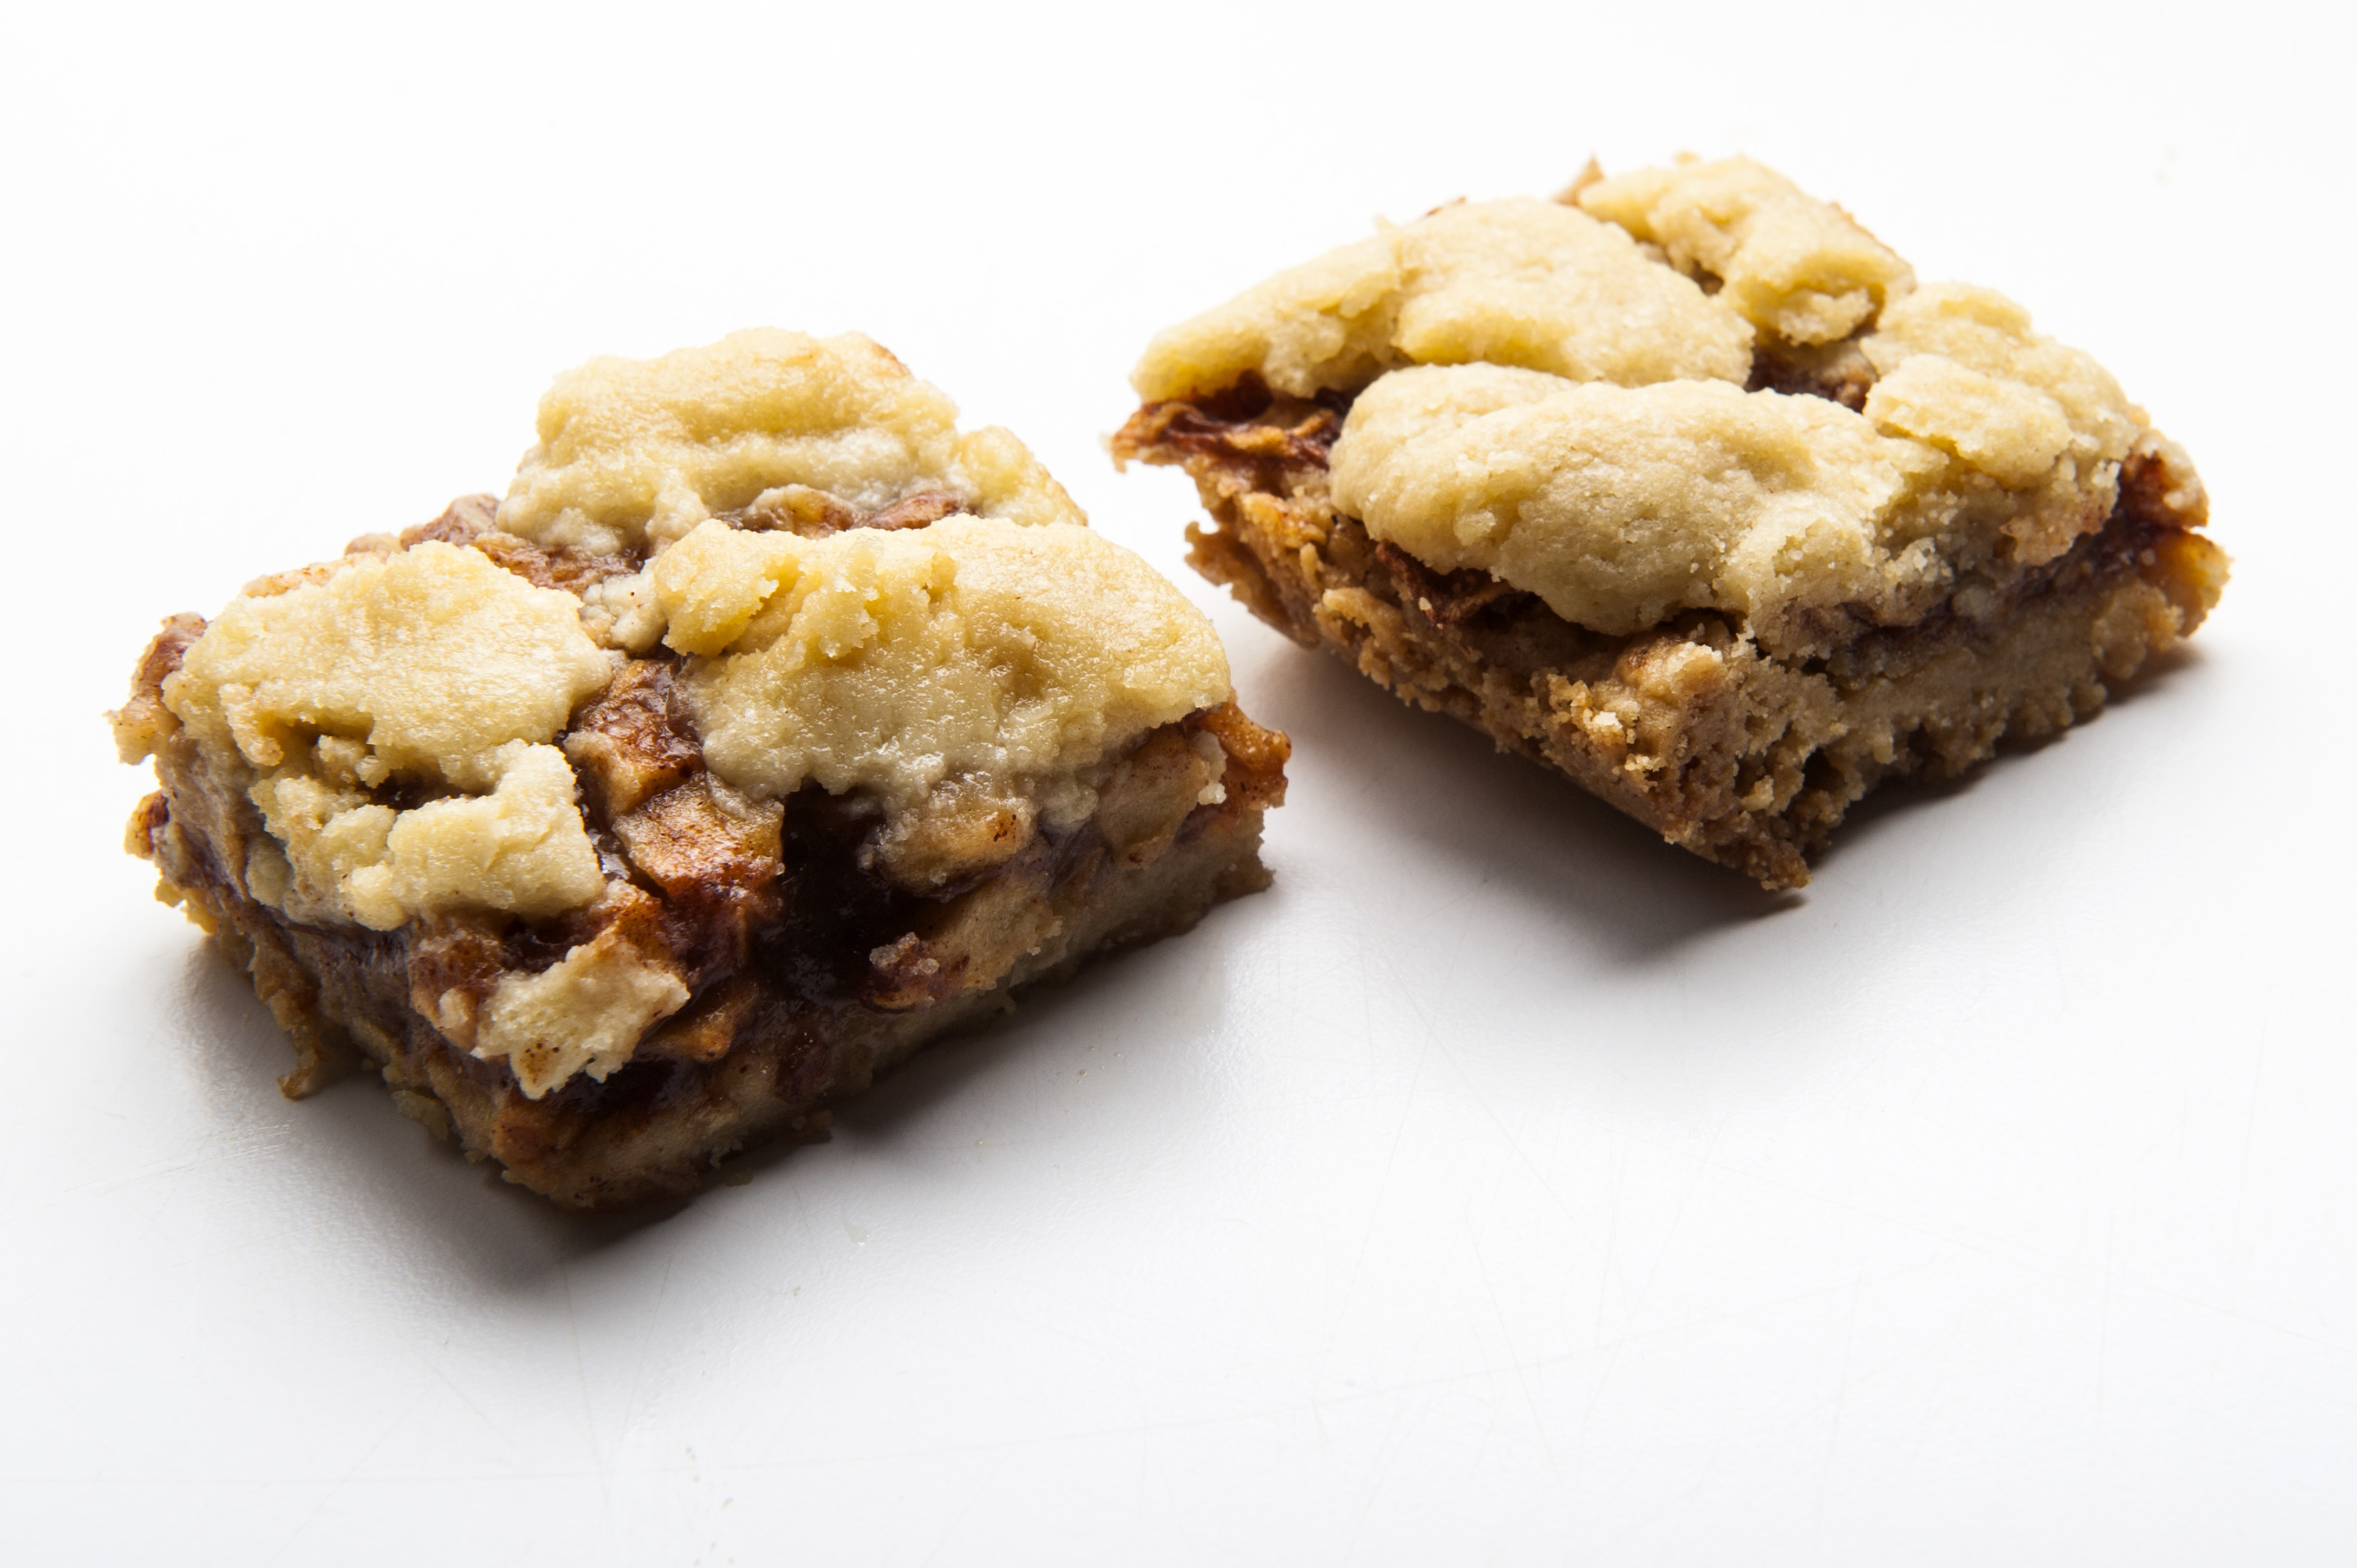 <p>Skip the overly sugary varieties and opt for a healthier bar recipe this Thanksgiving, like <a href="http://www.eatingwell.com/recipe/252977/apple-cinnamon-fruit-bars/">this one from Eating Well Magazine</a>.</p><p><a href='https://www.msn.com/en-us/community/channel/vid-cj9pqbr0vn9in2b6ddcd8sfgpfq6x6utp44fssrv6mc2gtybw0us'>Follow us on MSN to see more of our exclusive lifestyle content.</a></p>